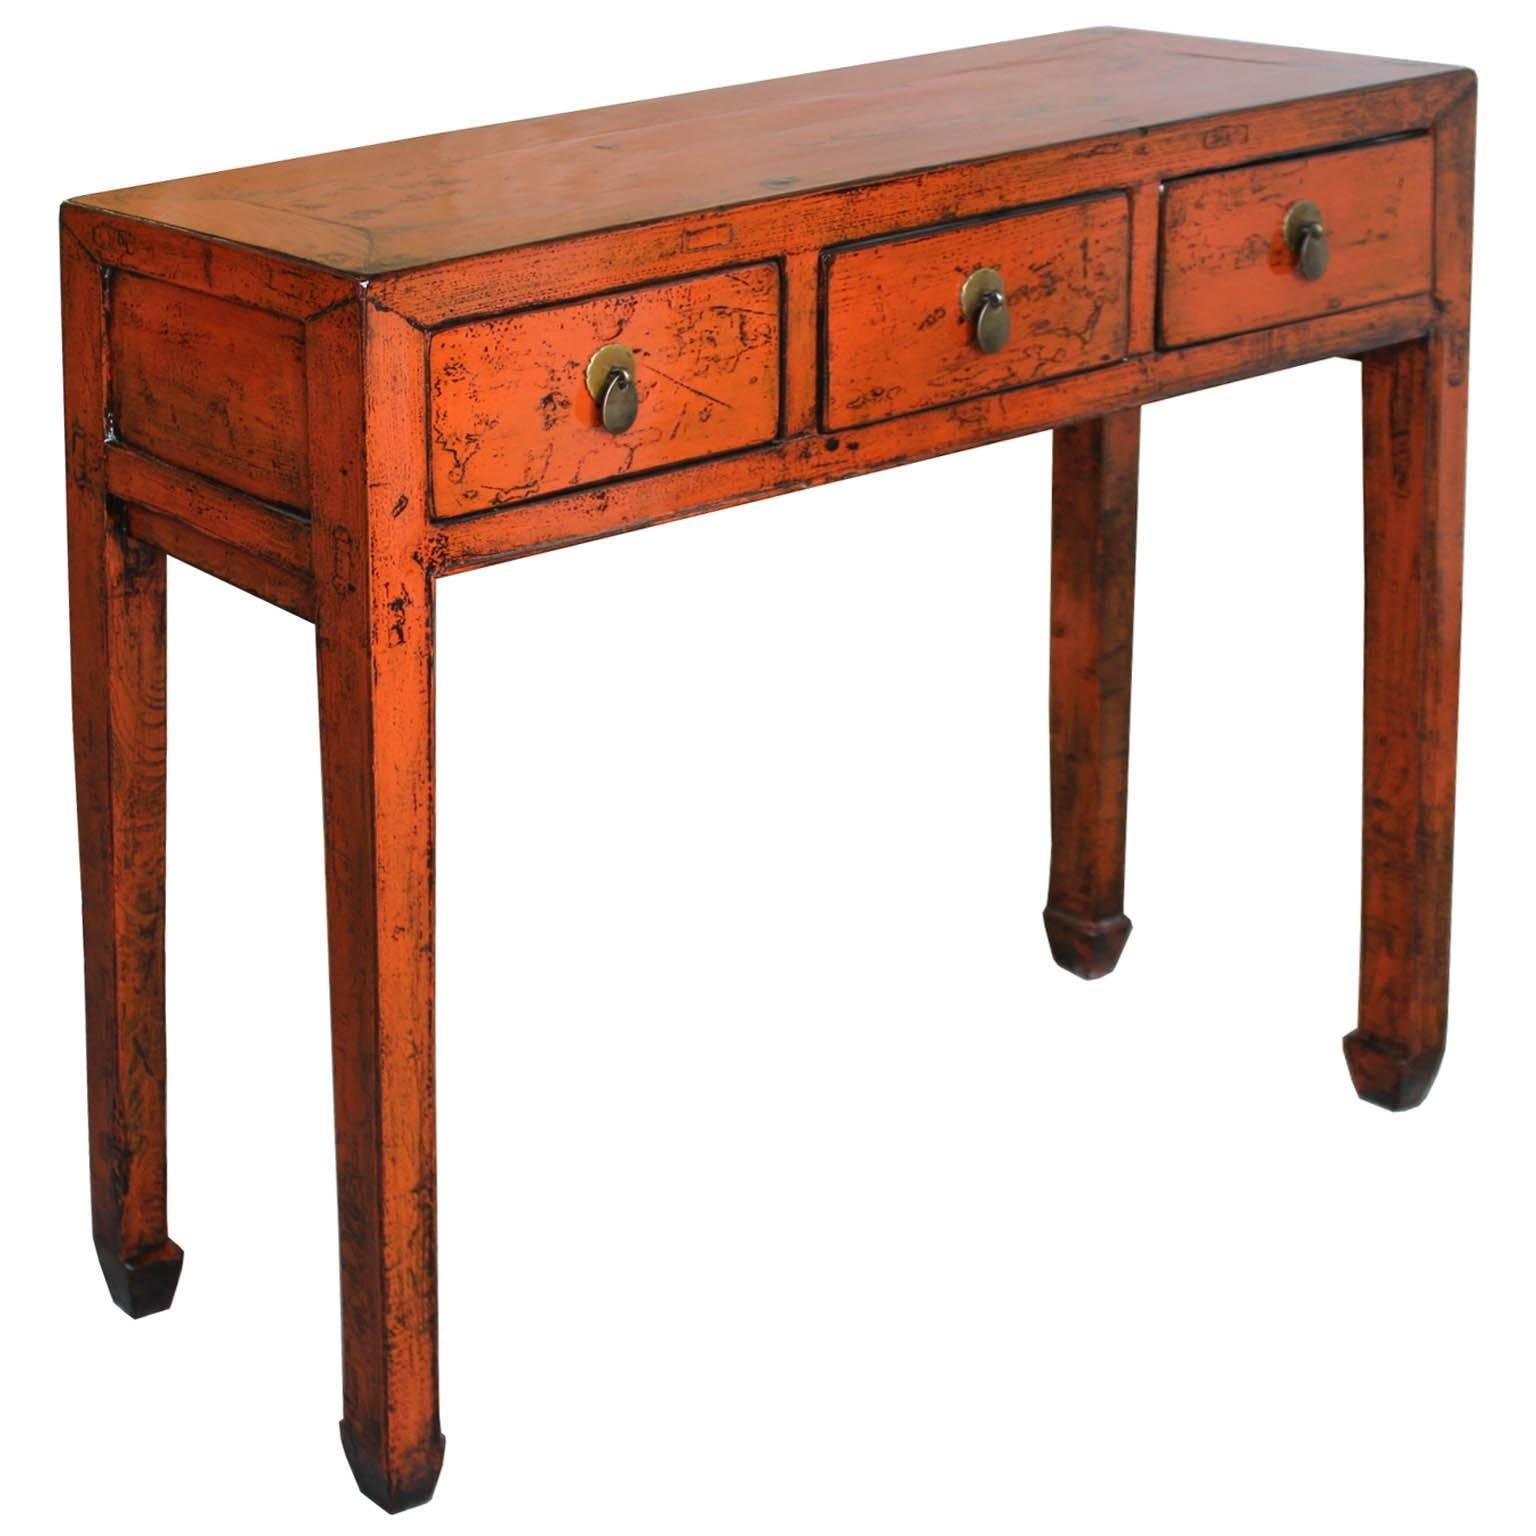 Three-drawer orange lacquer console table with horse-hoof feet, Shandong, China, circa 1900. New hardware. Some wear.
              